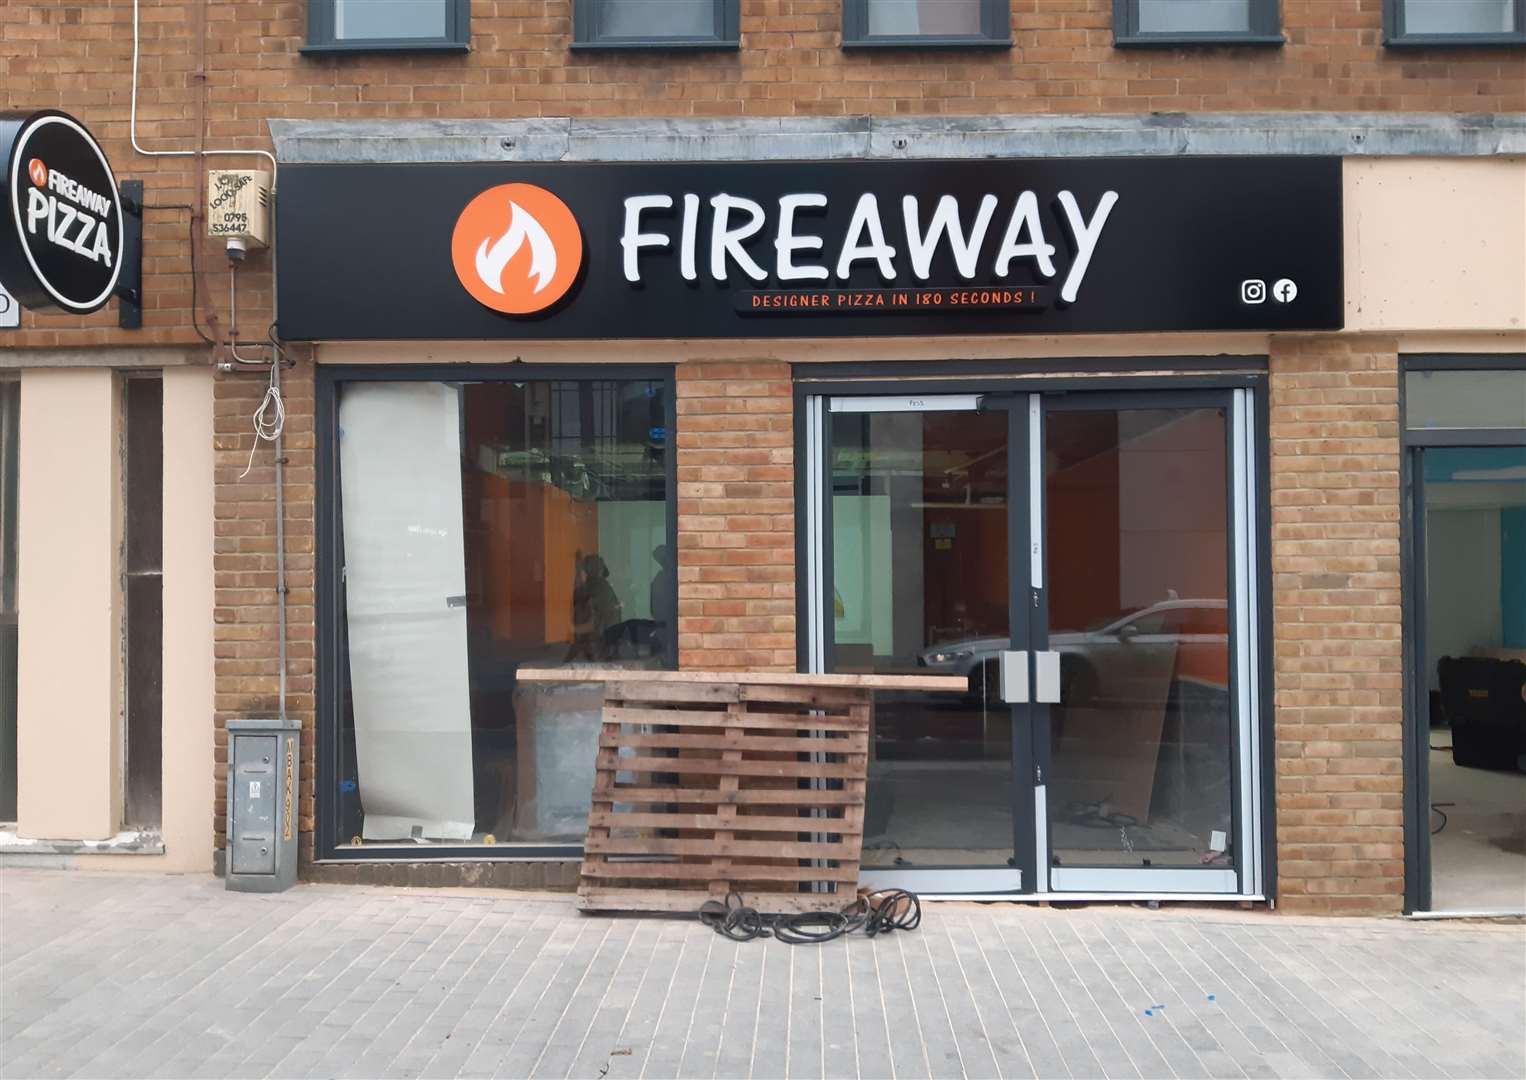 Fireaway Pizza is also coming to the units below Trafalgar House